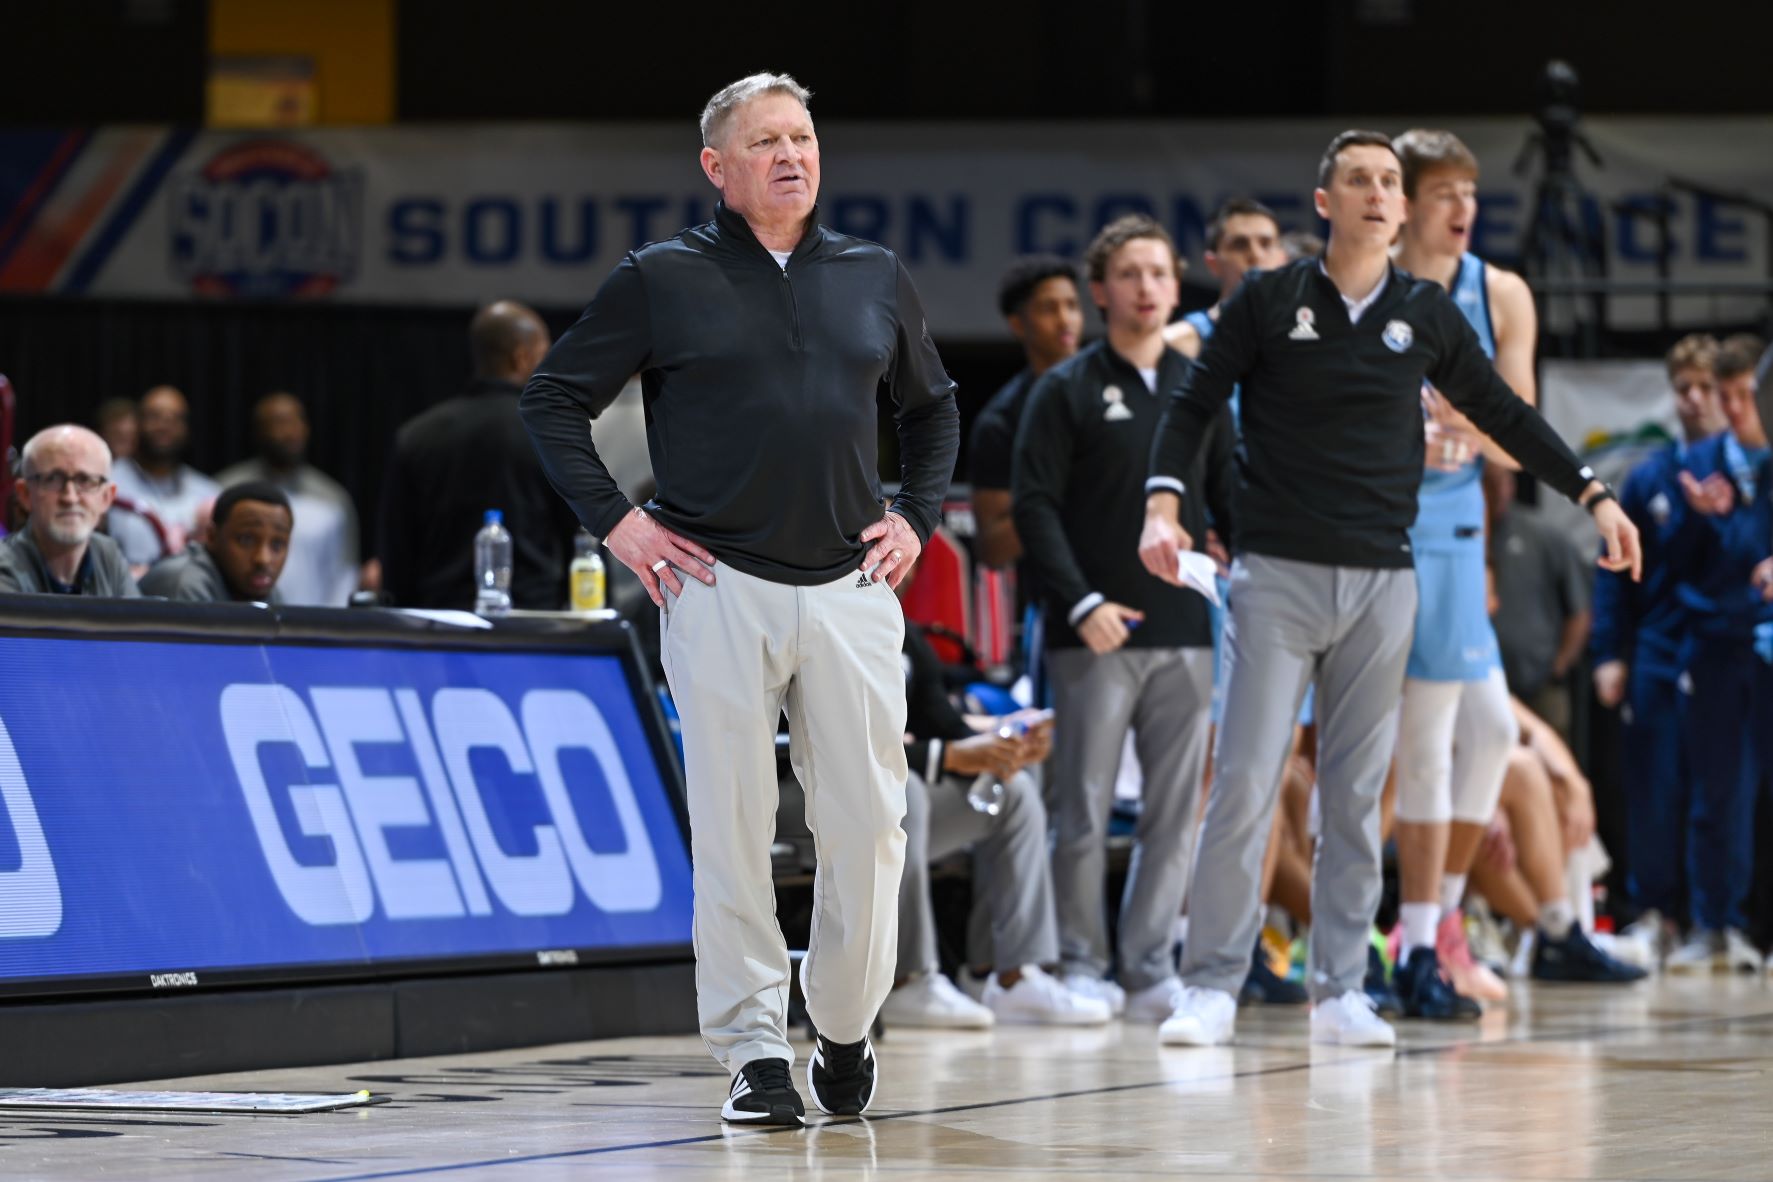 Search underway for new Bulldogs basketball coach; Baucom contract will not  be extended - The Citadel Today